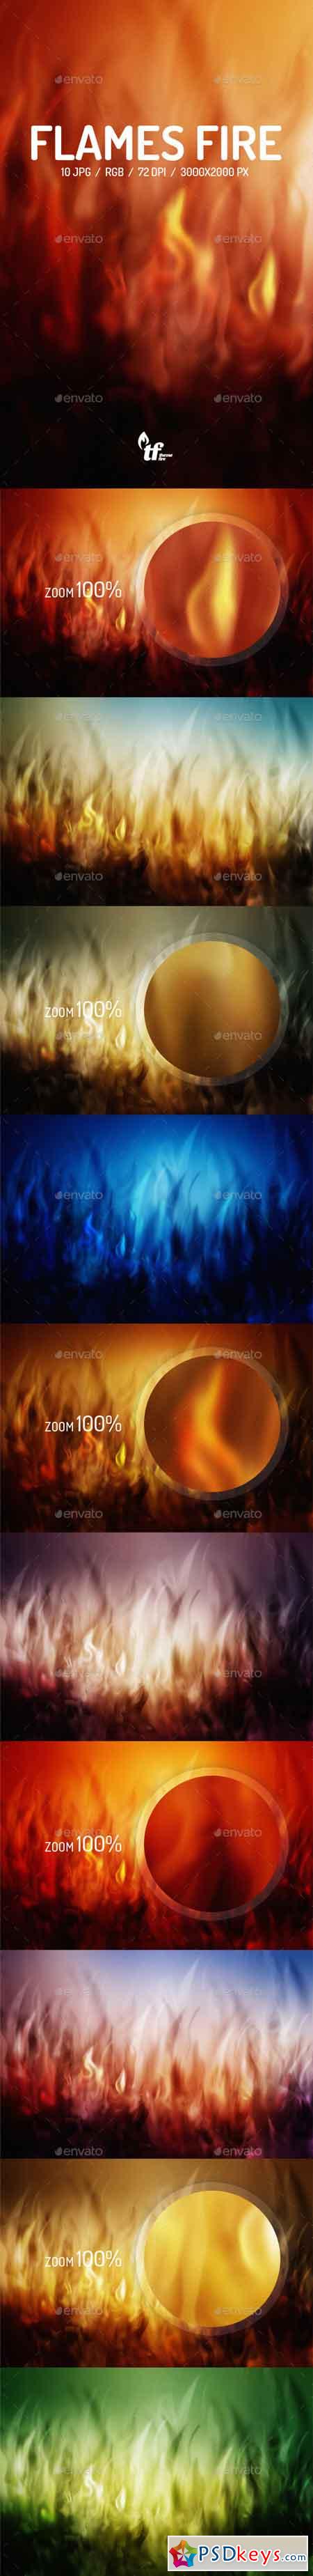 Flames Fire Backgrounds 9150833